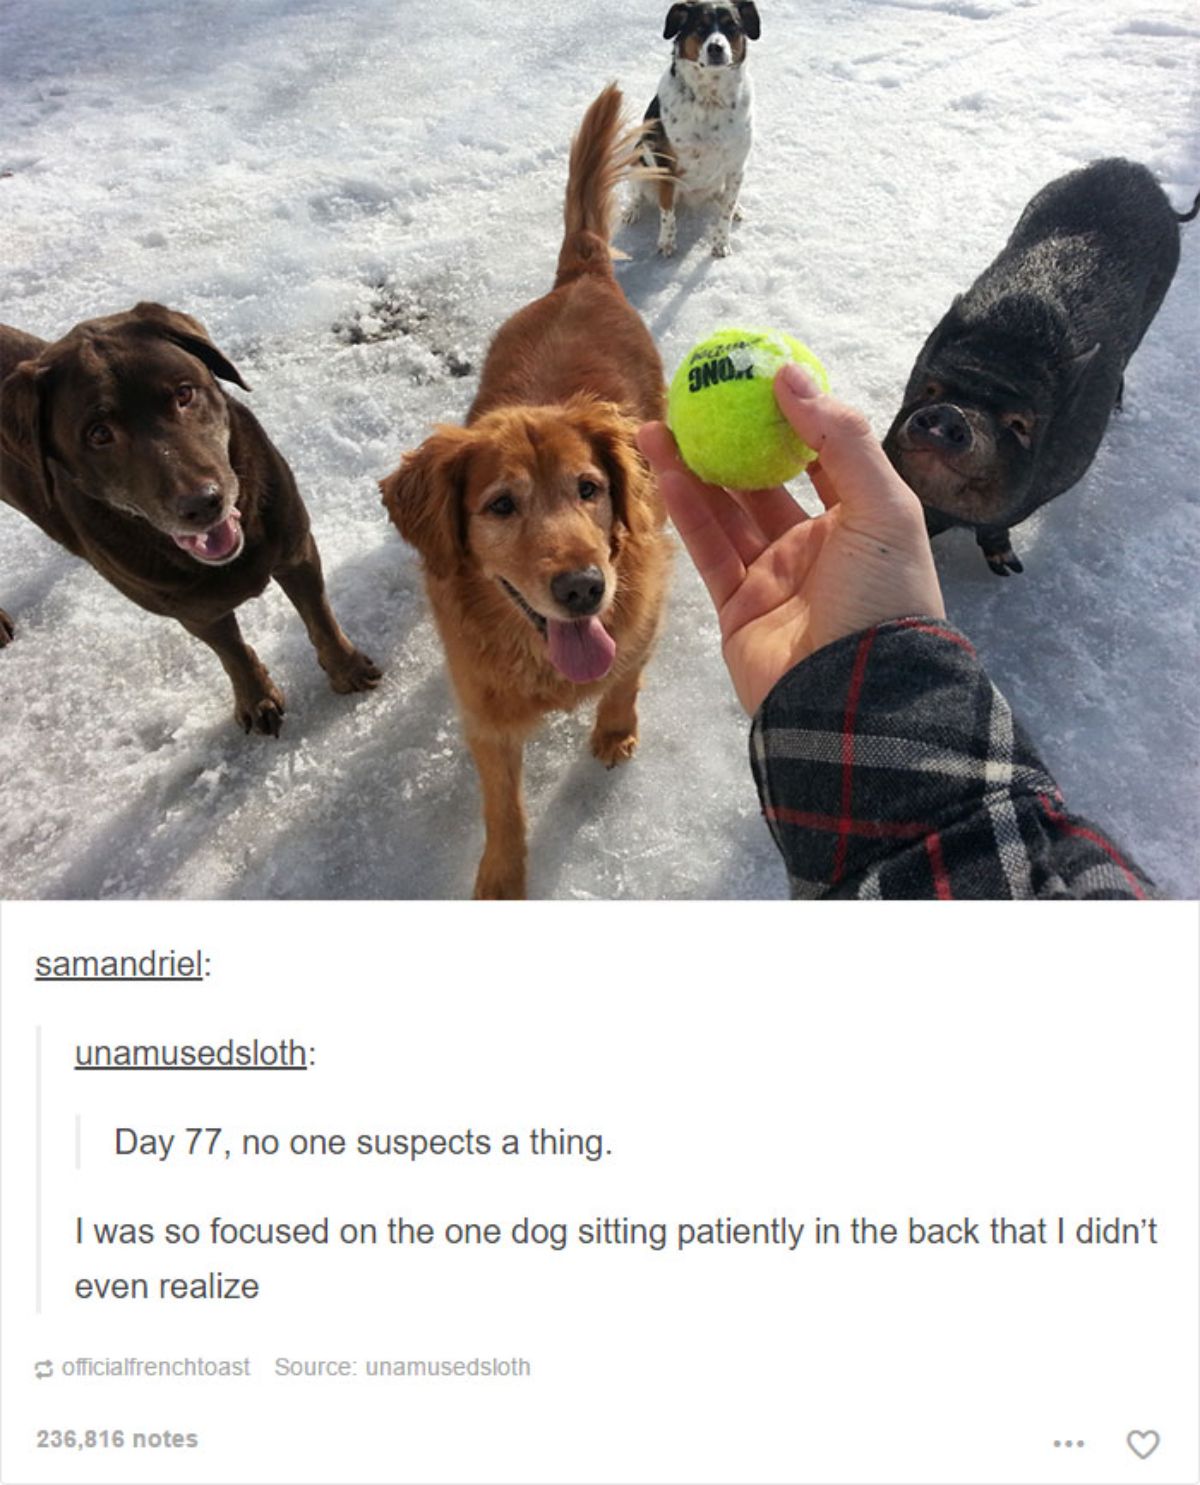 tumblr post of 2 brown dogs, a black white and brown dog and a black pig waiting on snow for a tennis ball to be thrown and caption says it's day 77 no one suspects a thing